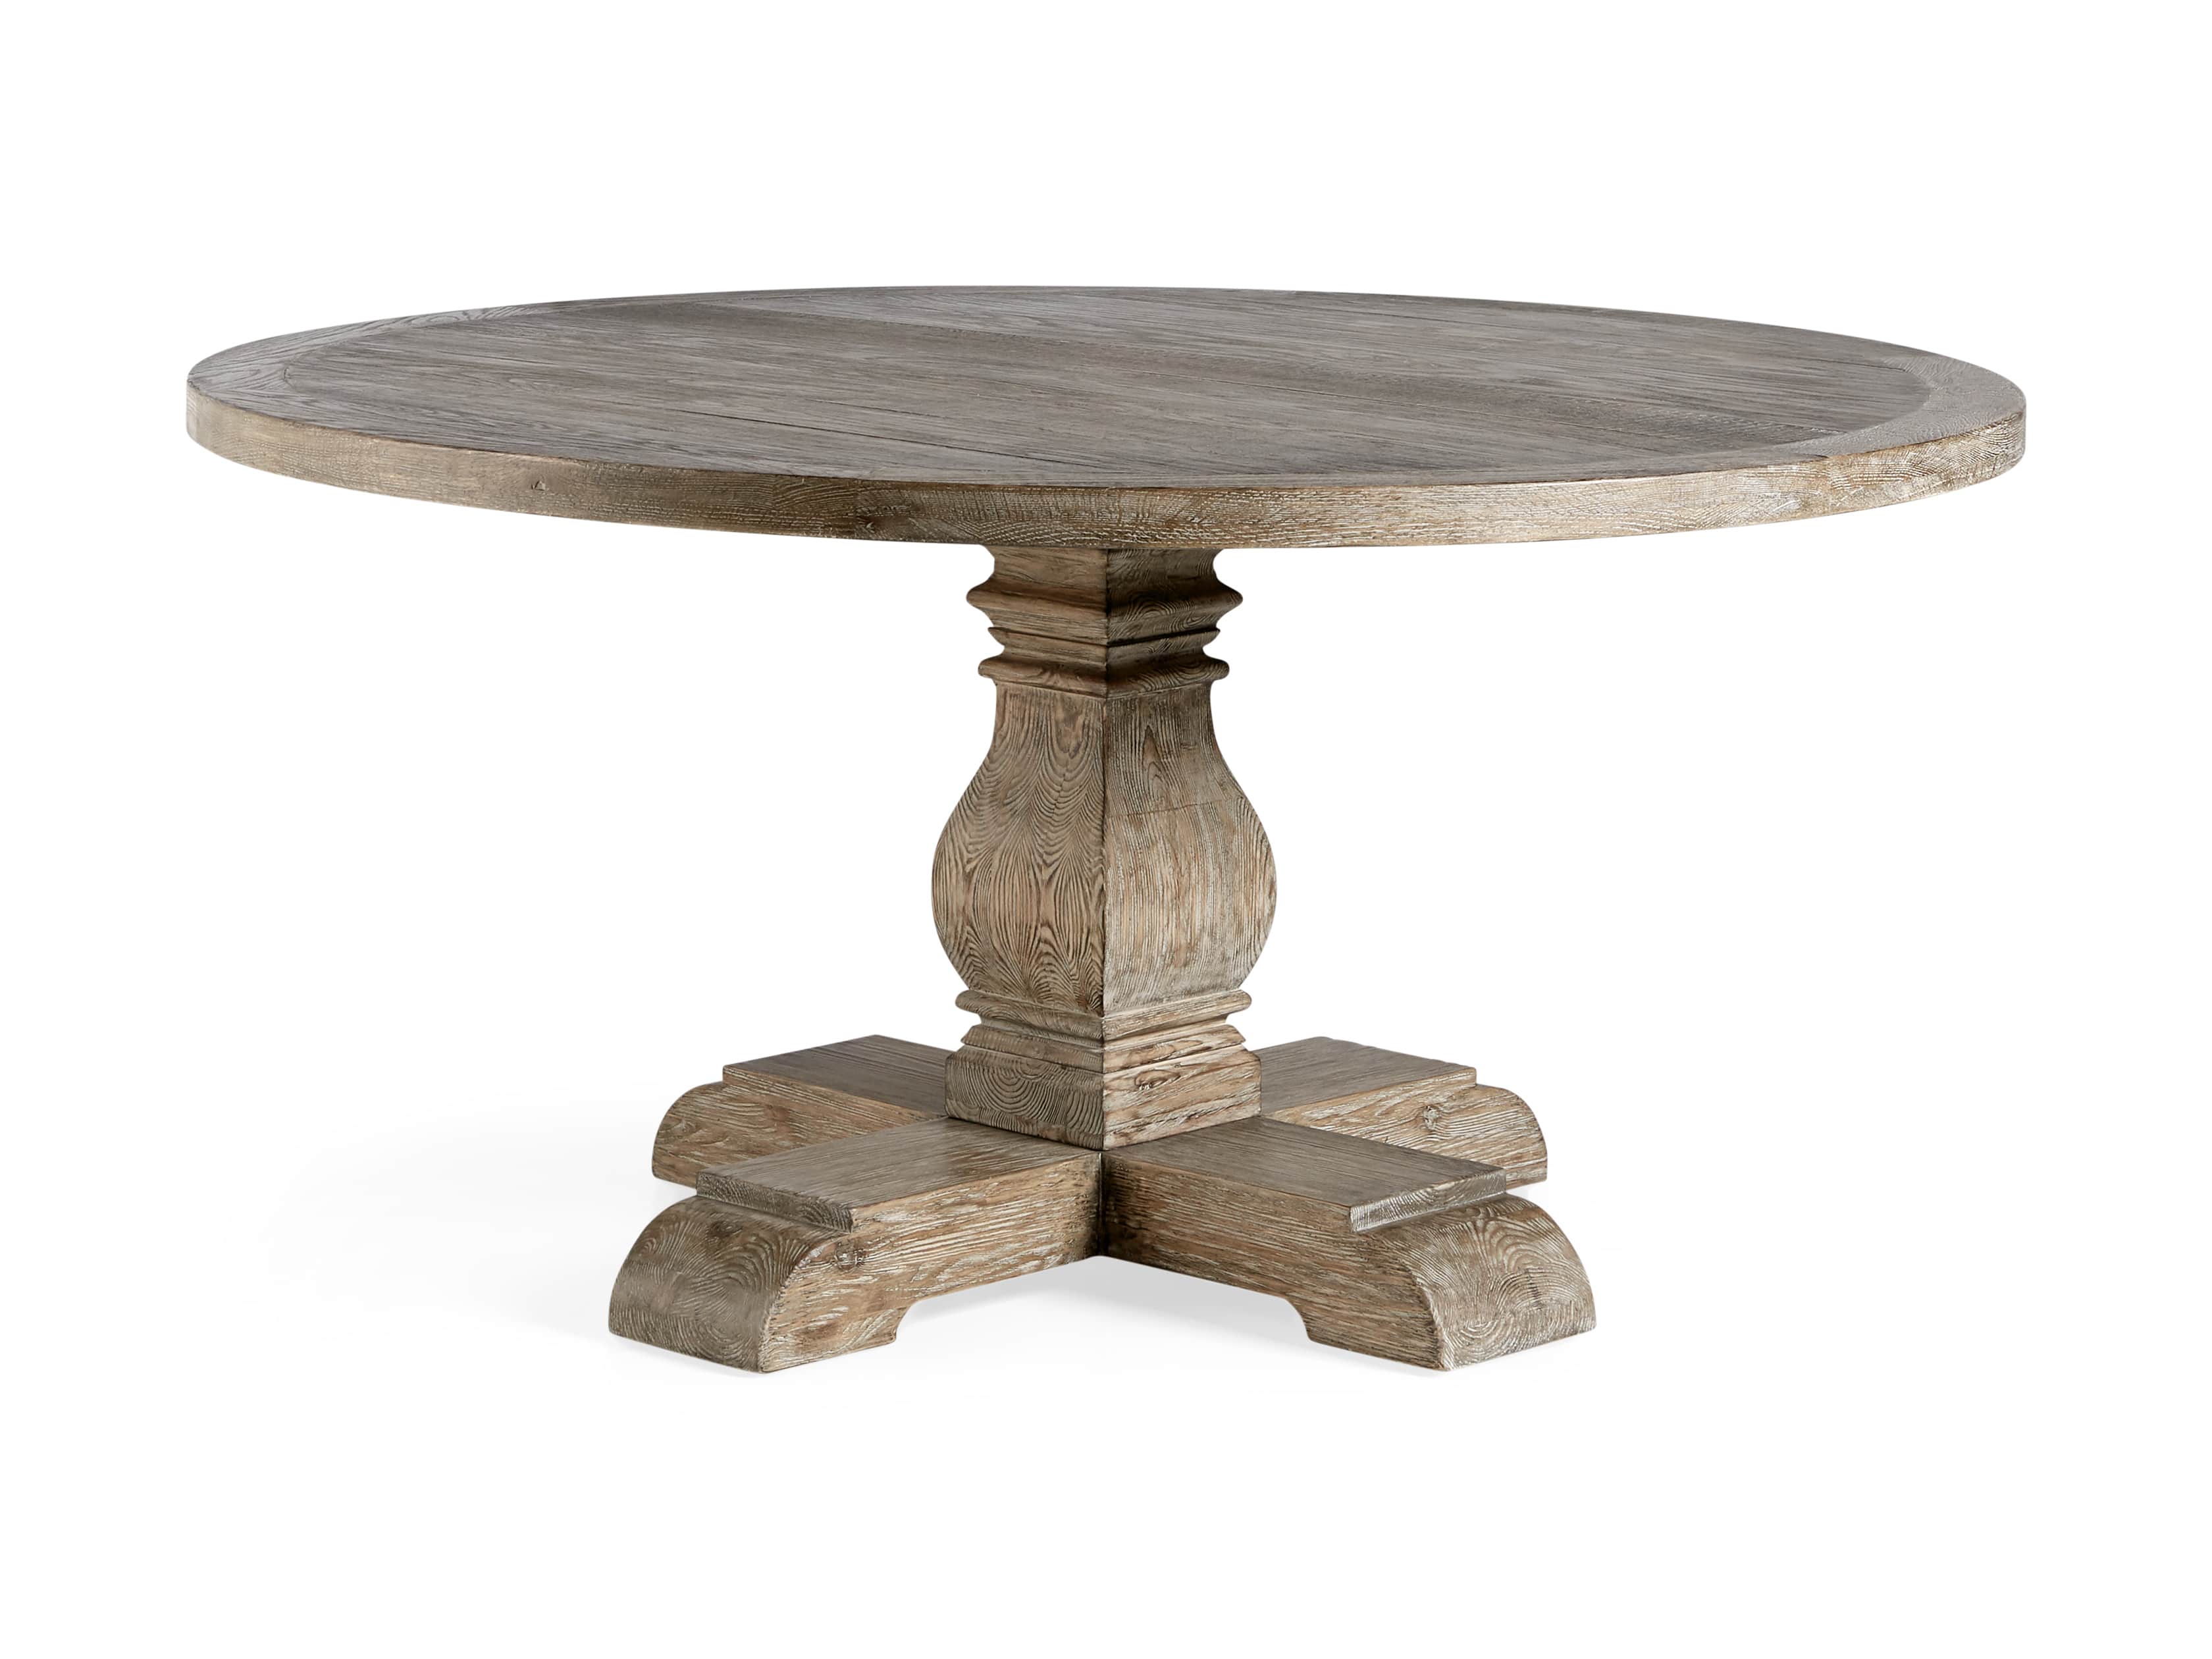 Kensington Round Dining Table Arhaus, How Many Does A 54 Inch Round Table Seat